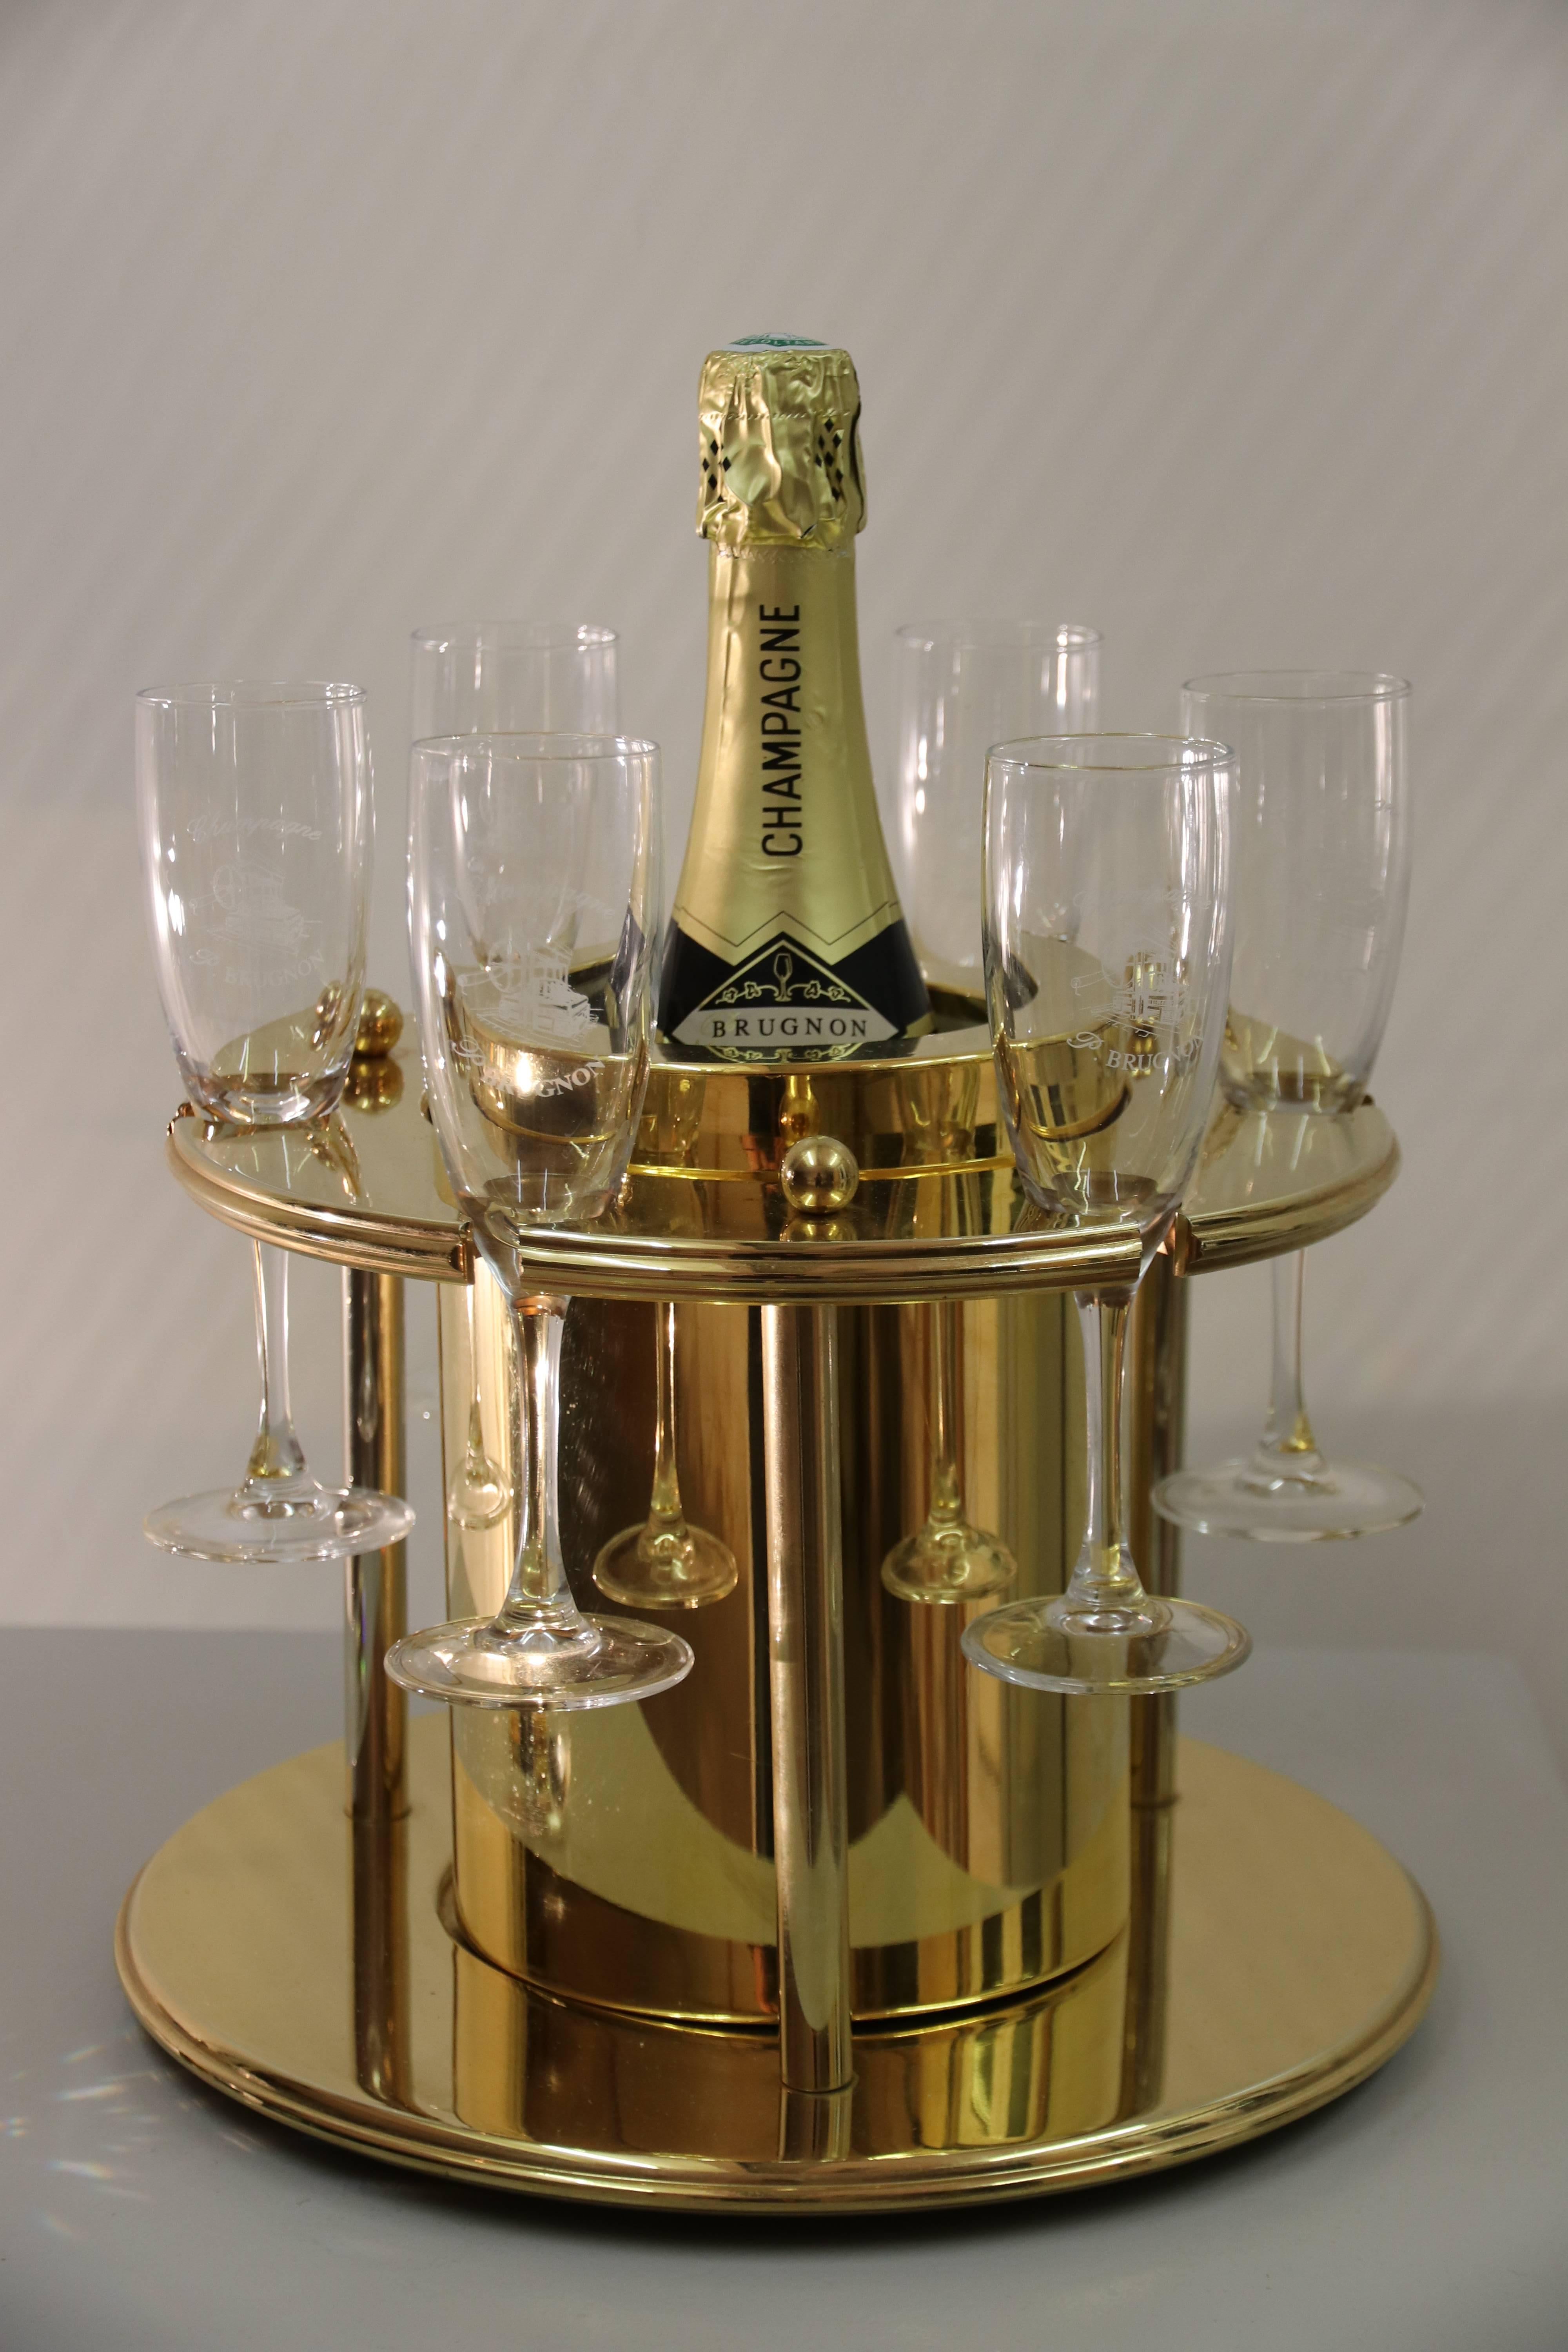 Rare piece from the Turnwald Collection - Switzerland. This is a 23 carat gold plated plastic Champagne bottle cooler with 4 inside cooling elements and room to place 6 champagne glasses around the cooler. Comes with the original chrystal bottle